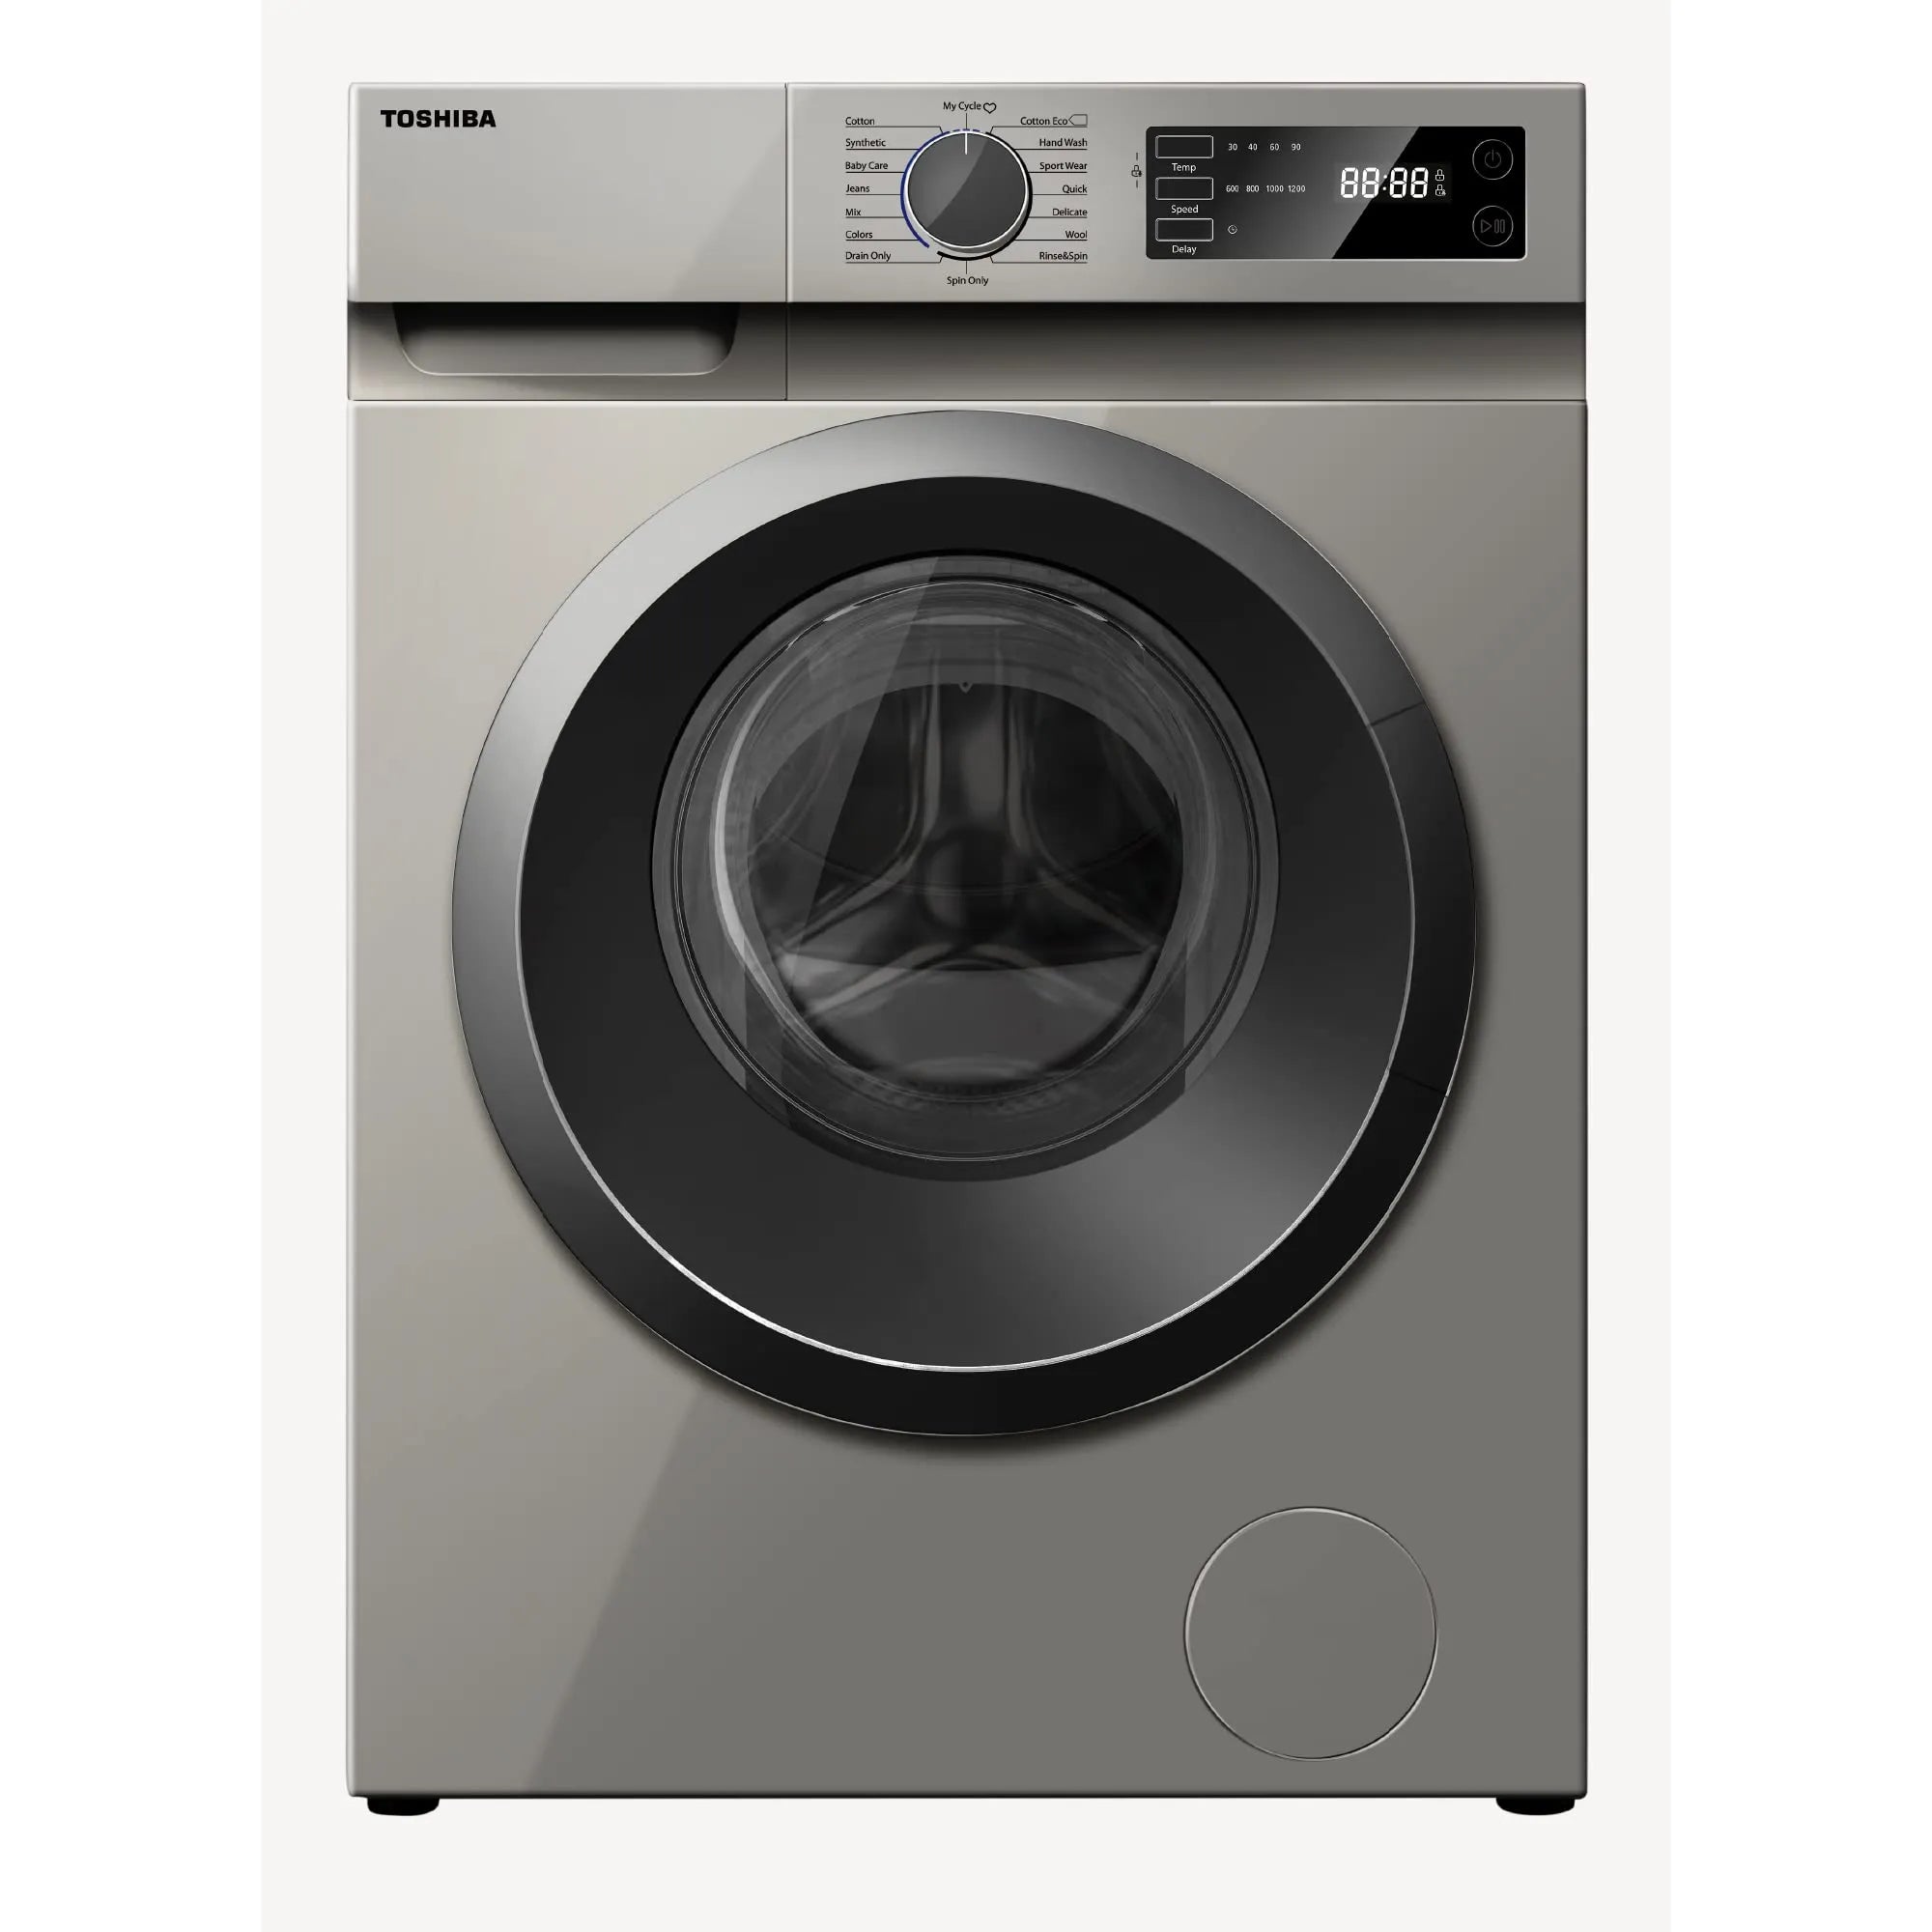 Toshiba TW-H80S2A(WK) 7kg Front Load Washing Machine with 1200 RPM spin speed. Sleek silver design with intuitive controls for easy laundry days.